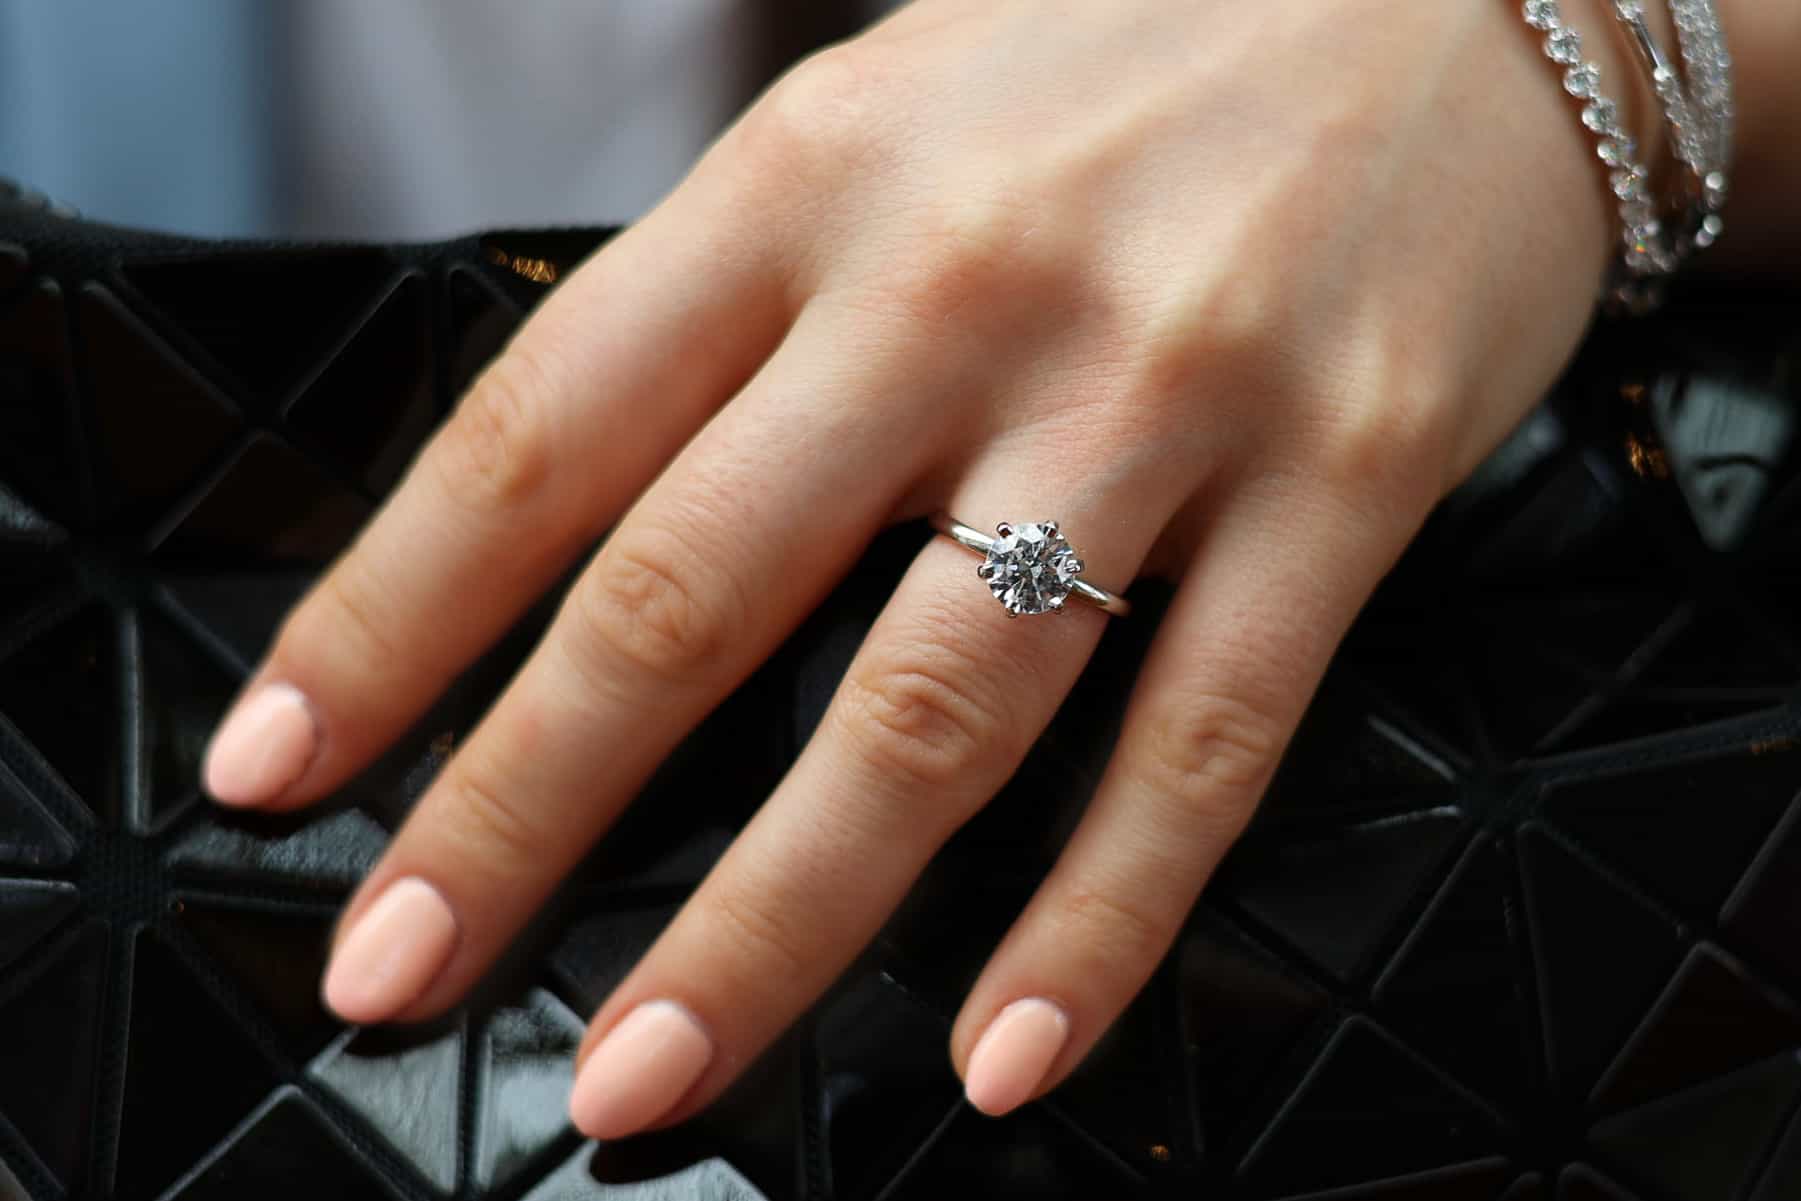 A close-up view of a woman's hand holding a black pouch. The hand is adorned with a round-cut engagement ring